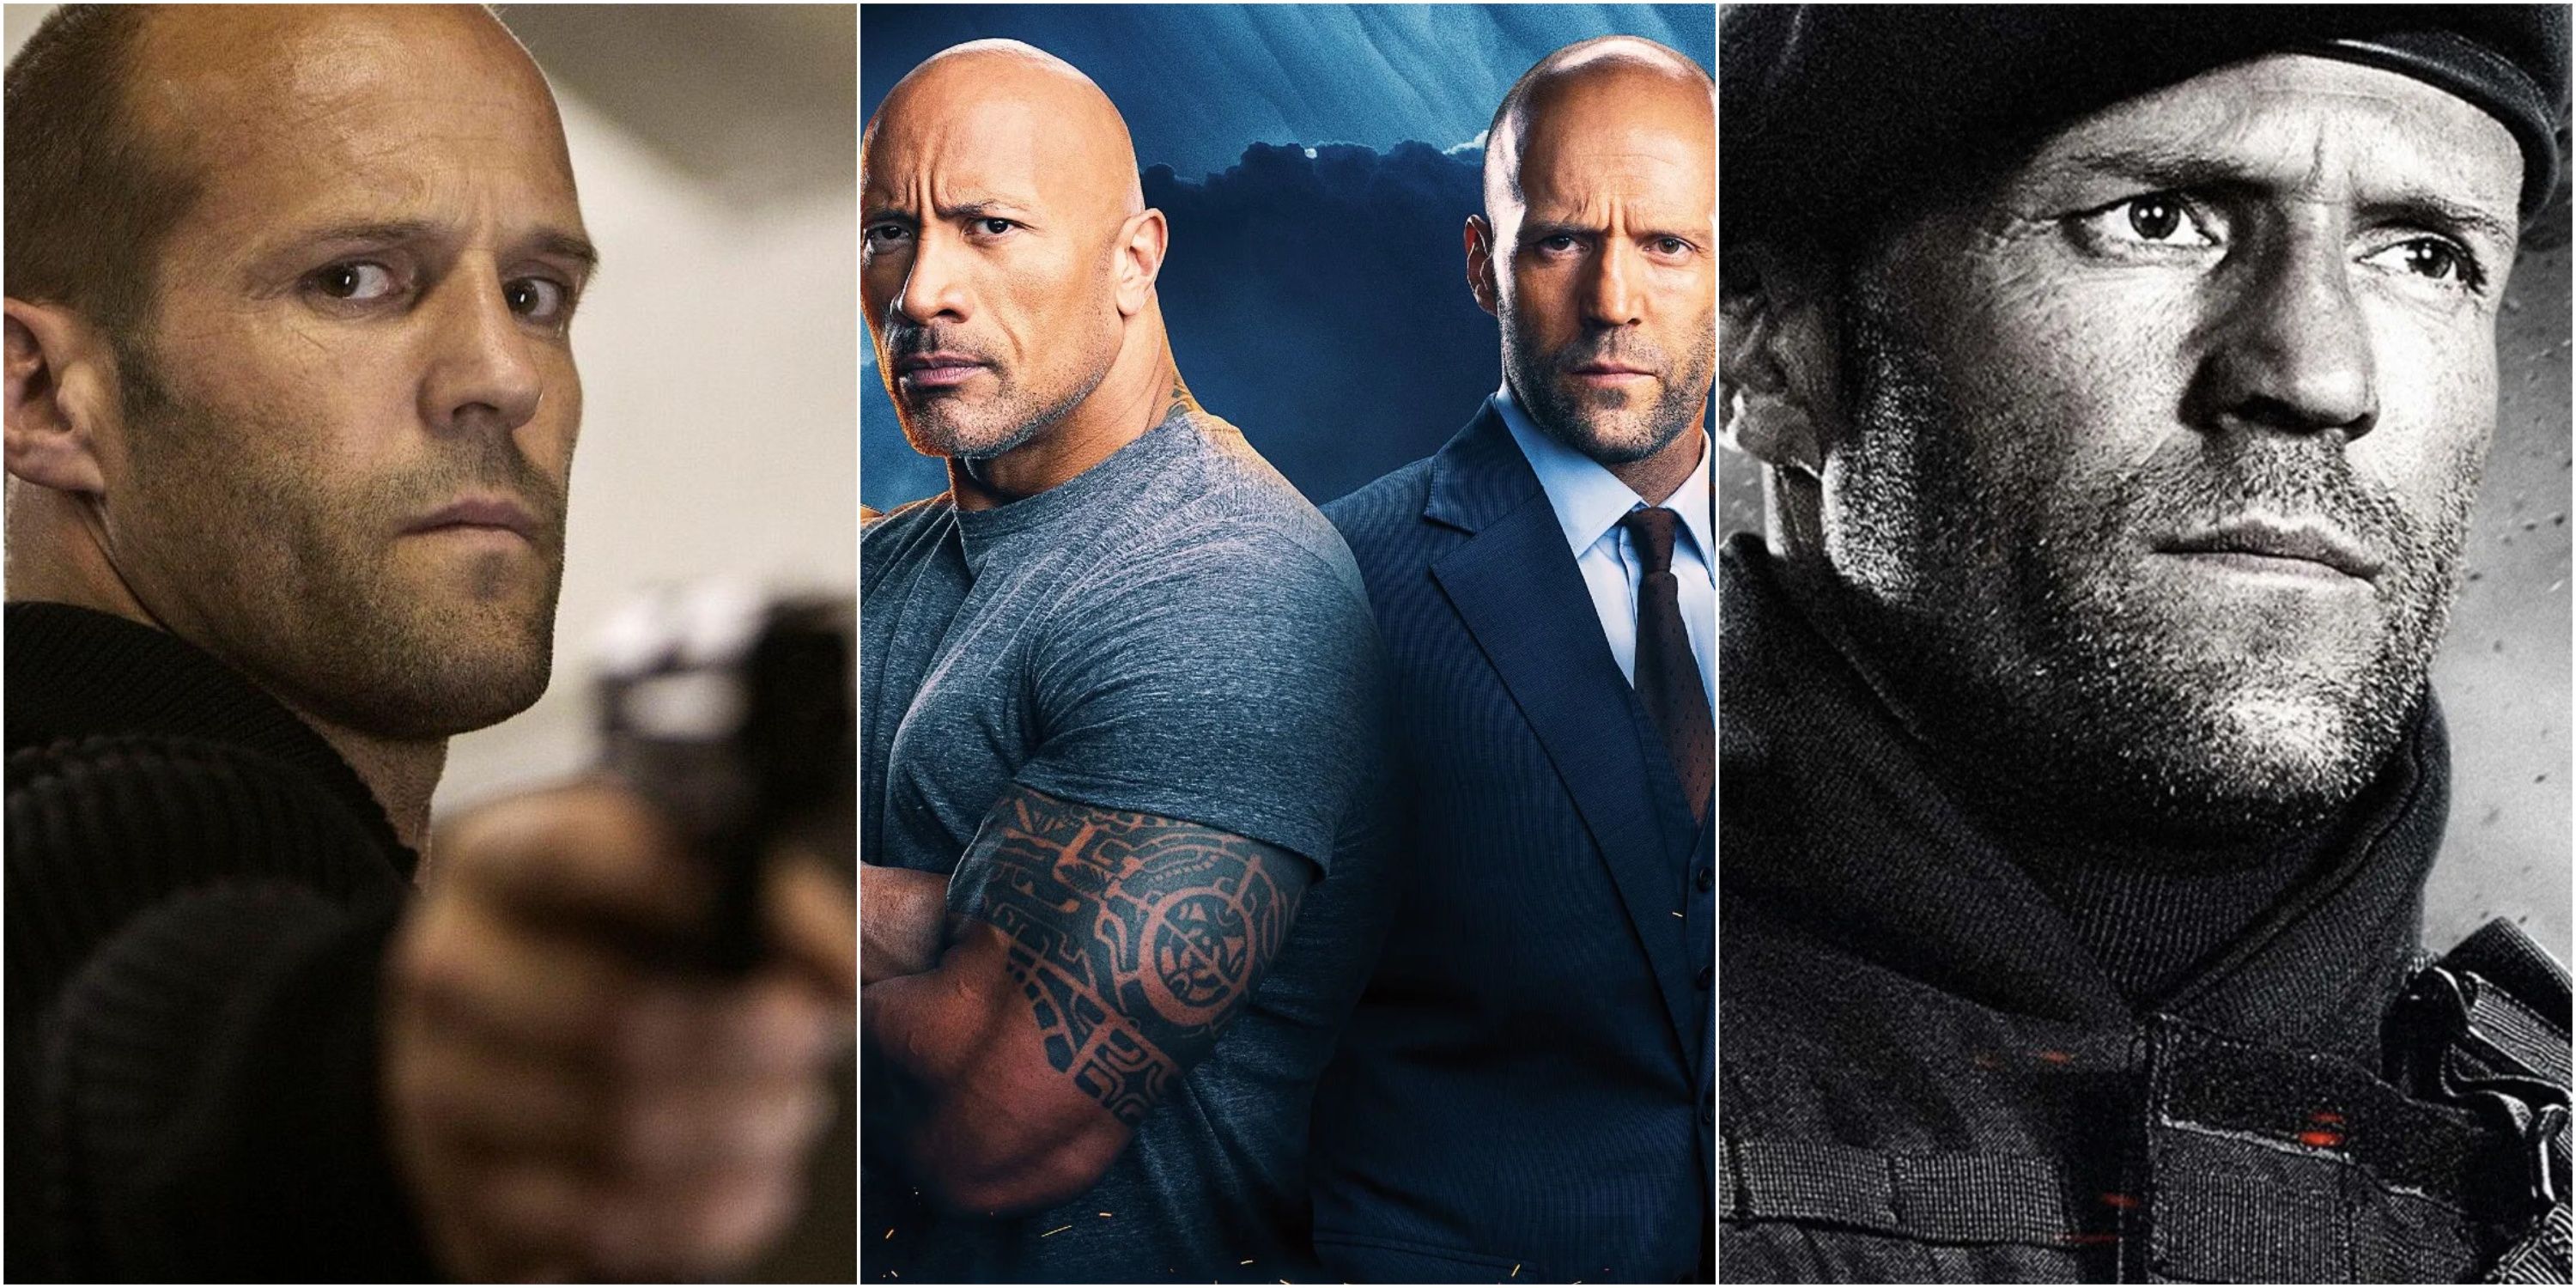 Jason Statham in The Mechanic, Hobbs and Shaw, Statham as Lee Christmas in Expendables 2